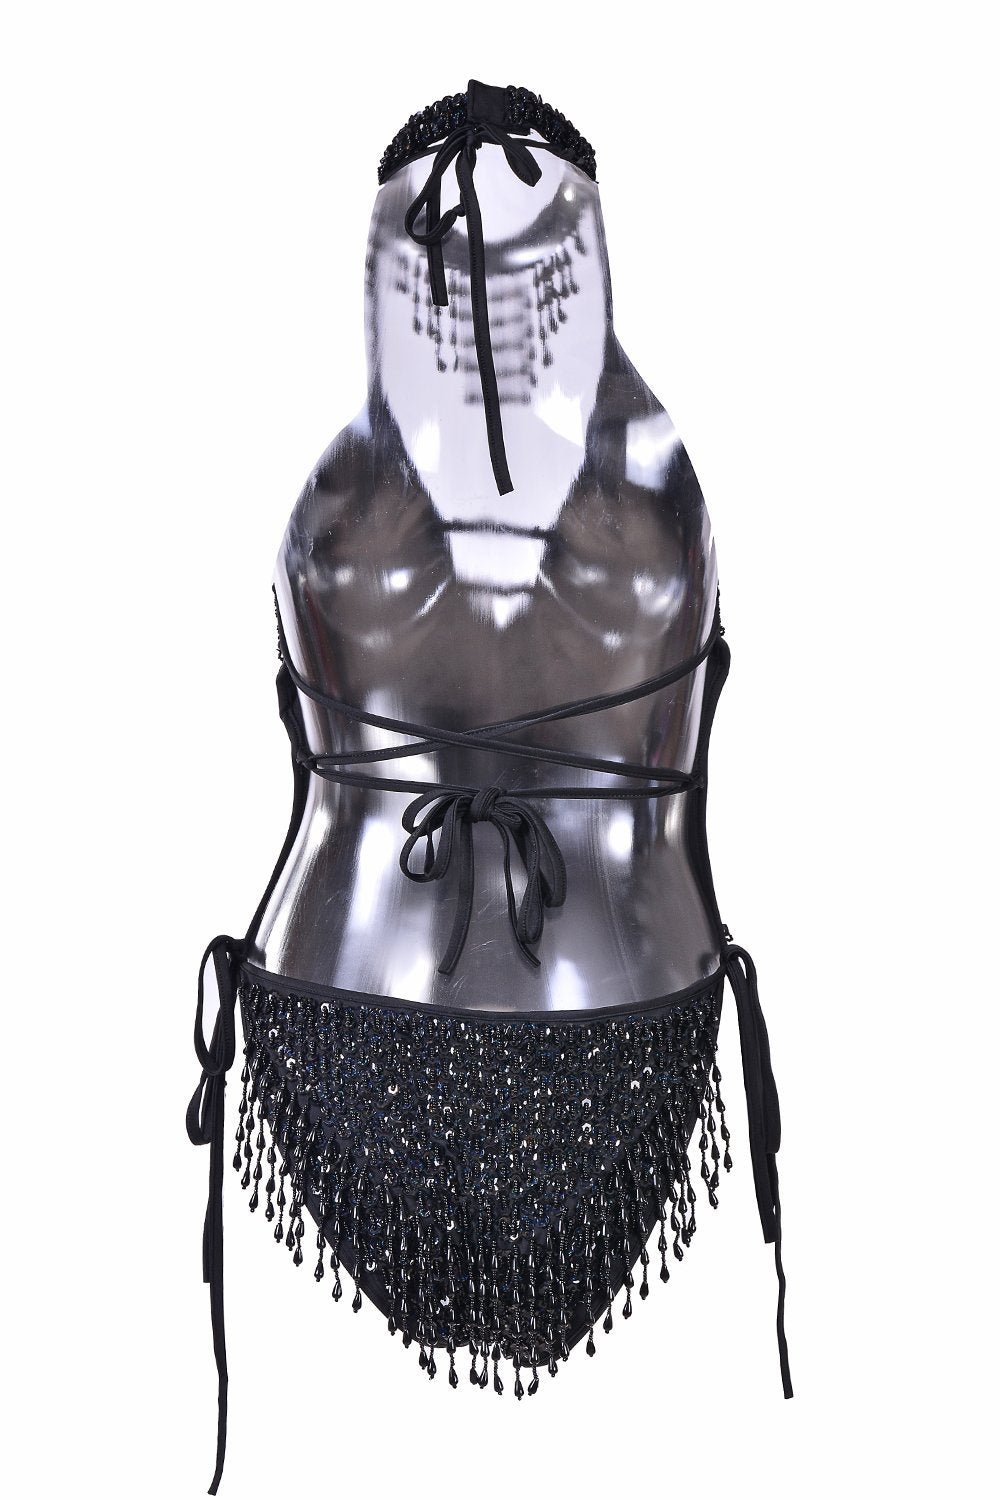 Hand Stitched Sequin Bodysuit- Midnight Rave clothes,rave outfits